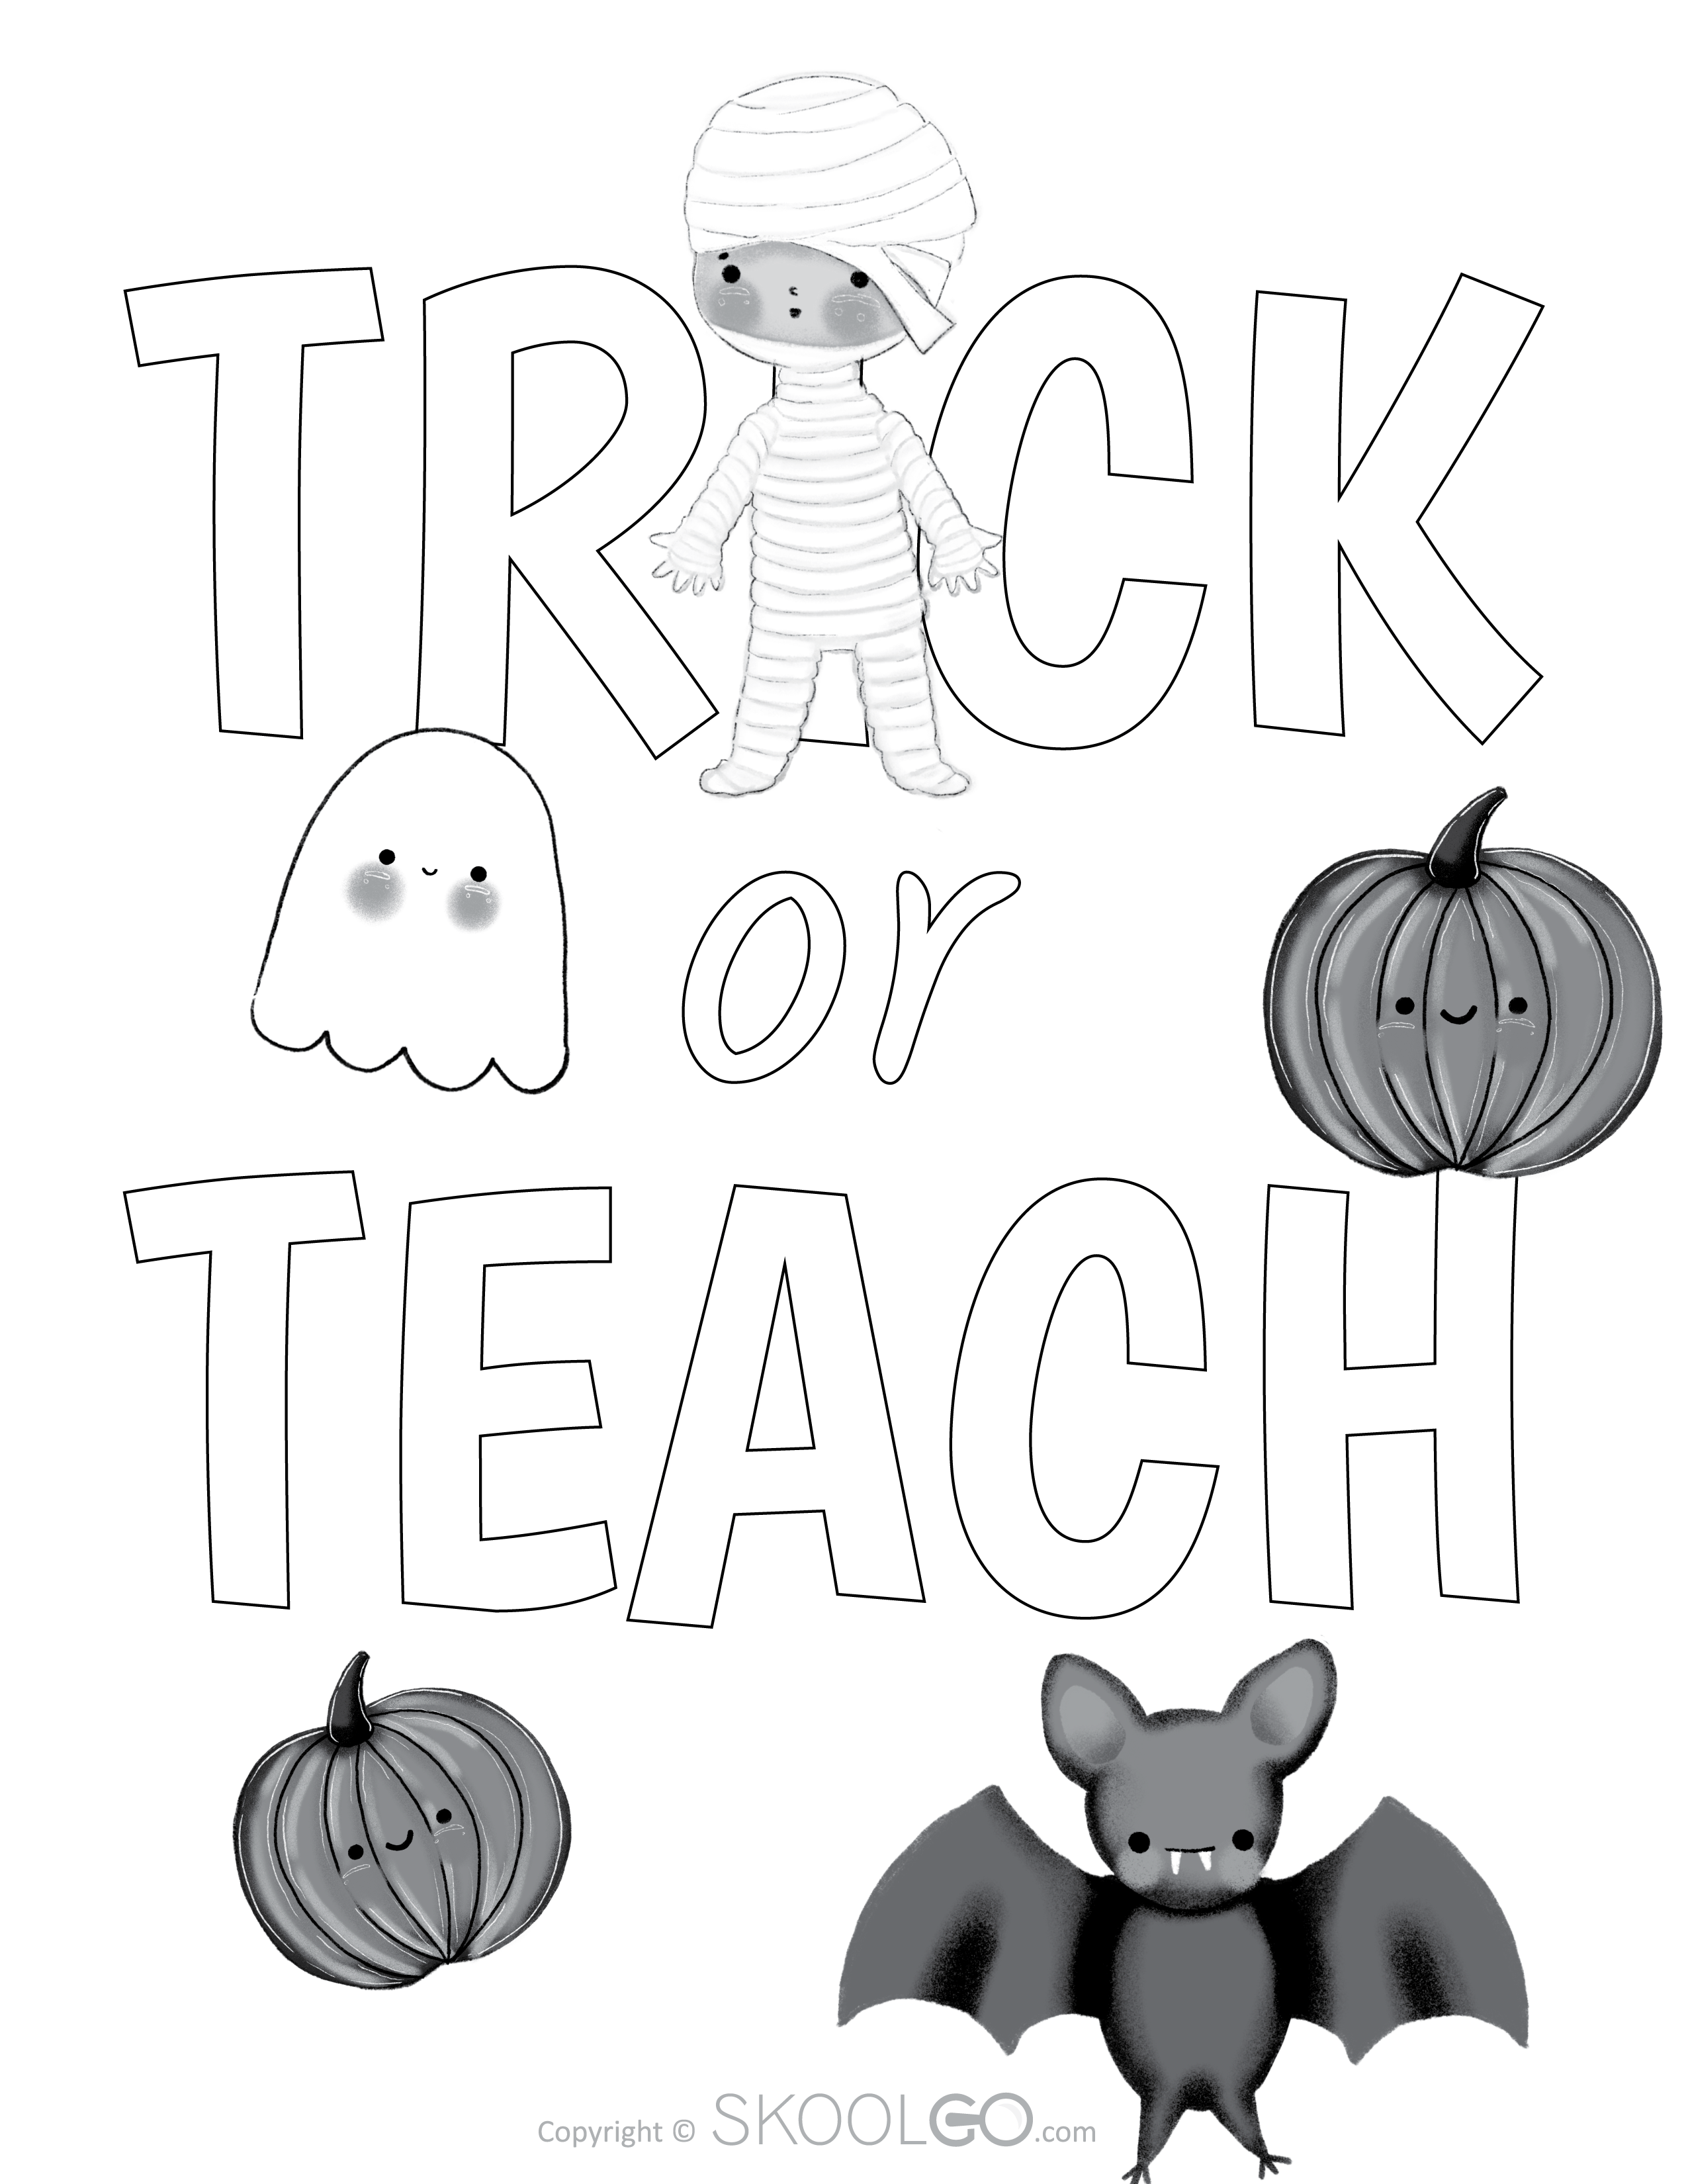 Trick Or Teach - Free Classroom Poster Coloring Version